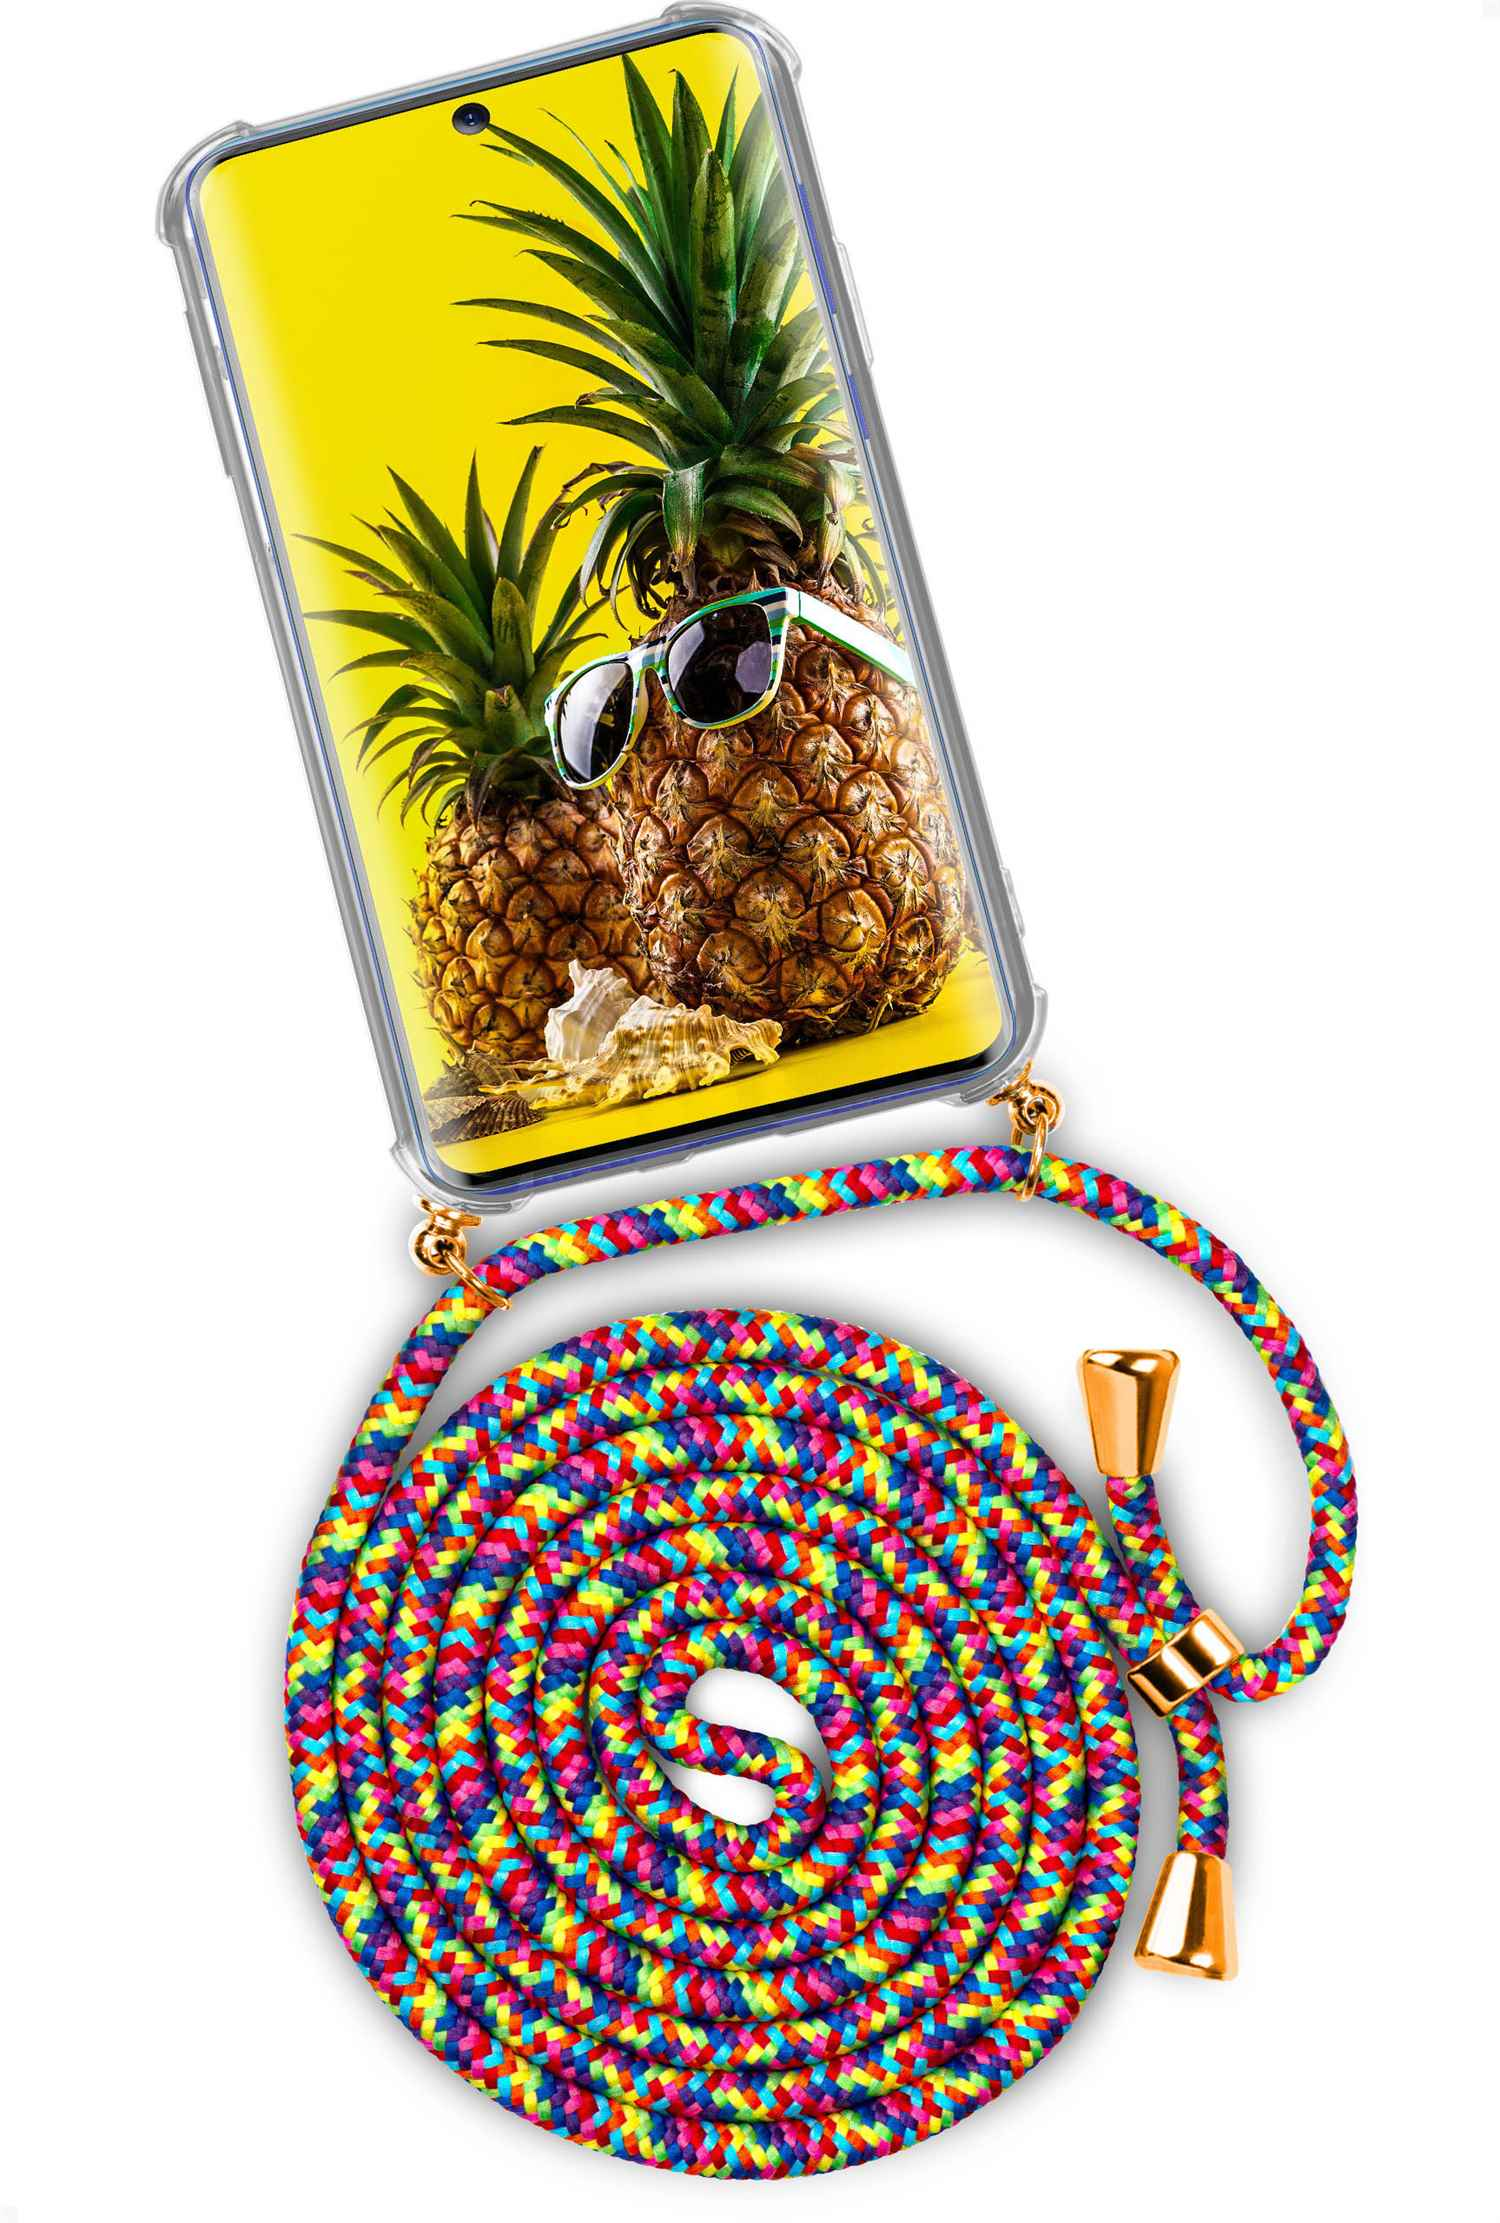 Fruity Galaxy Twist S20 Samsung, Friday Backcover, Case, (Gold) Ultra, ONEFLOW